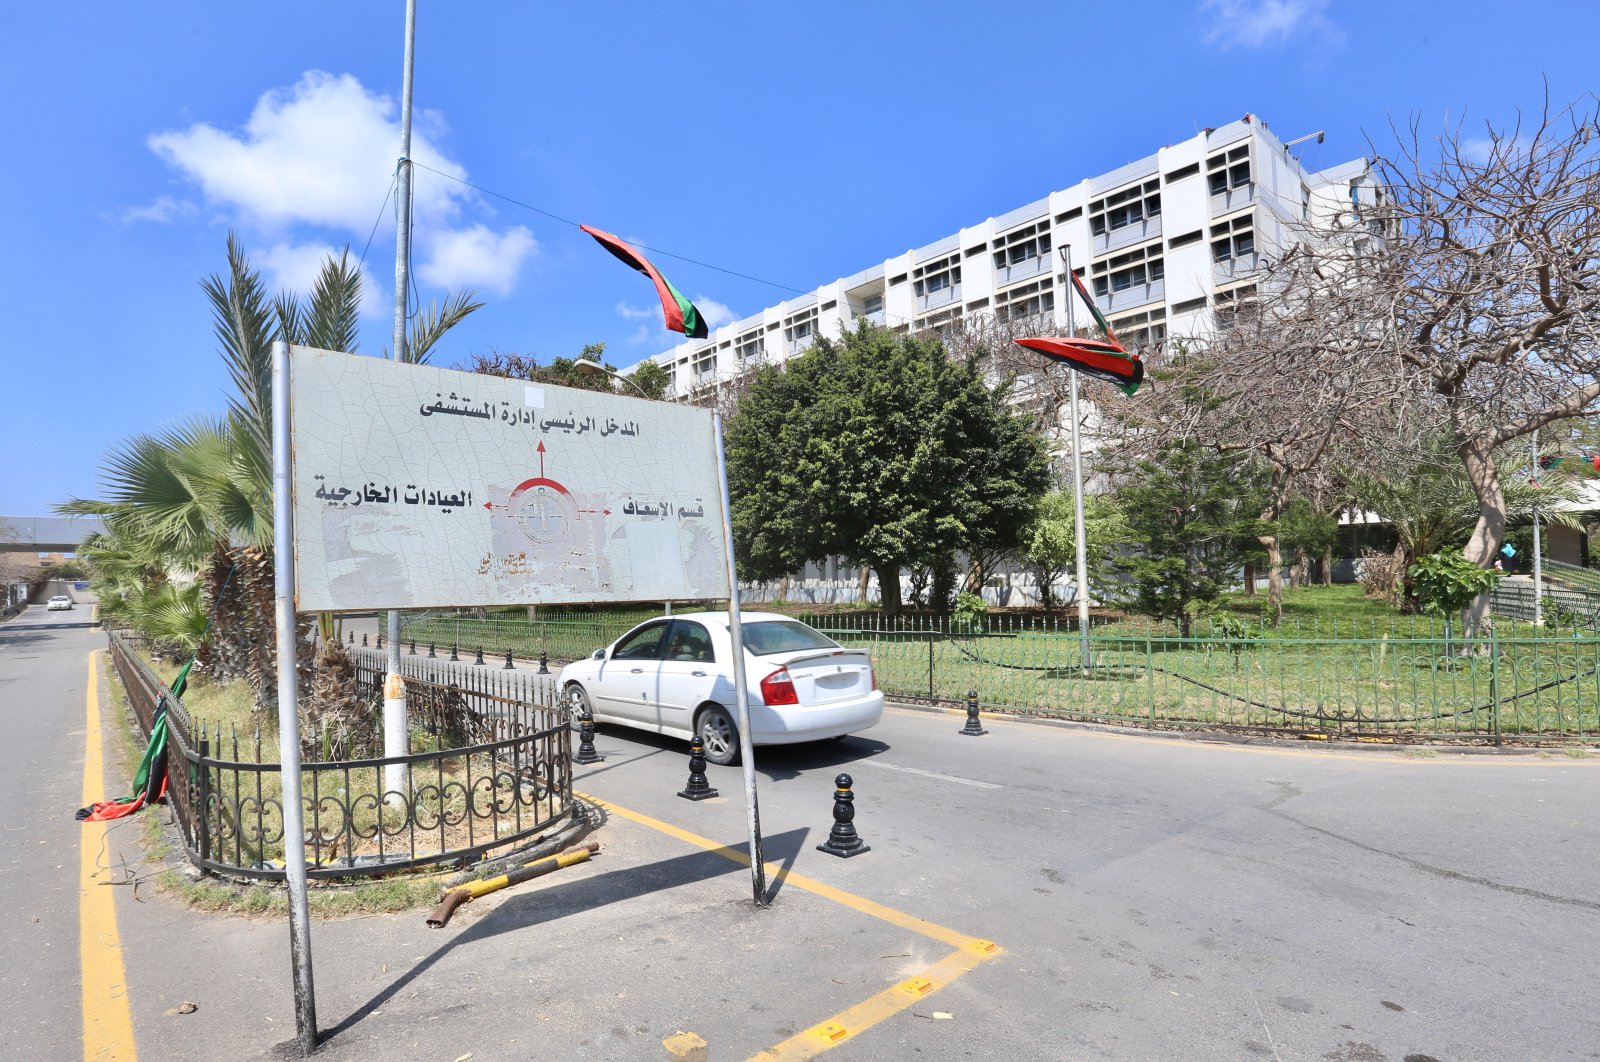 Forces loyal to eastern-based warlord Gen.Khalifa Haftar attacked Tripoli's Al-Khadra hospital being used for the fight against the coronavirus pandemic, Tuesday, April 7, 2020 (AA Photo)